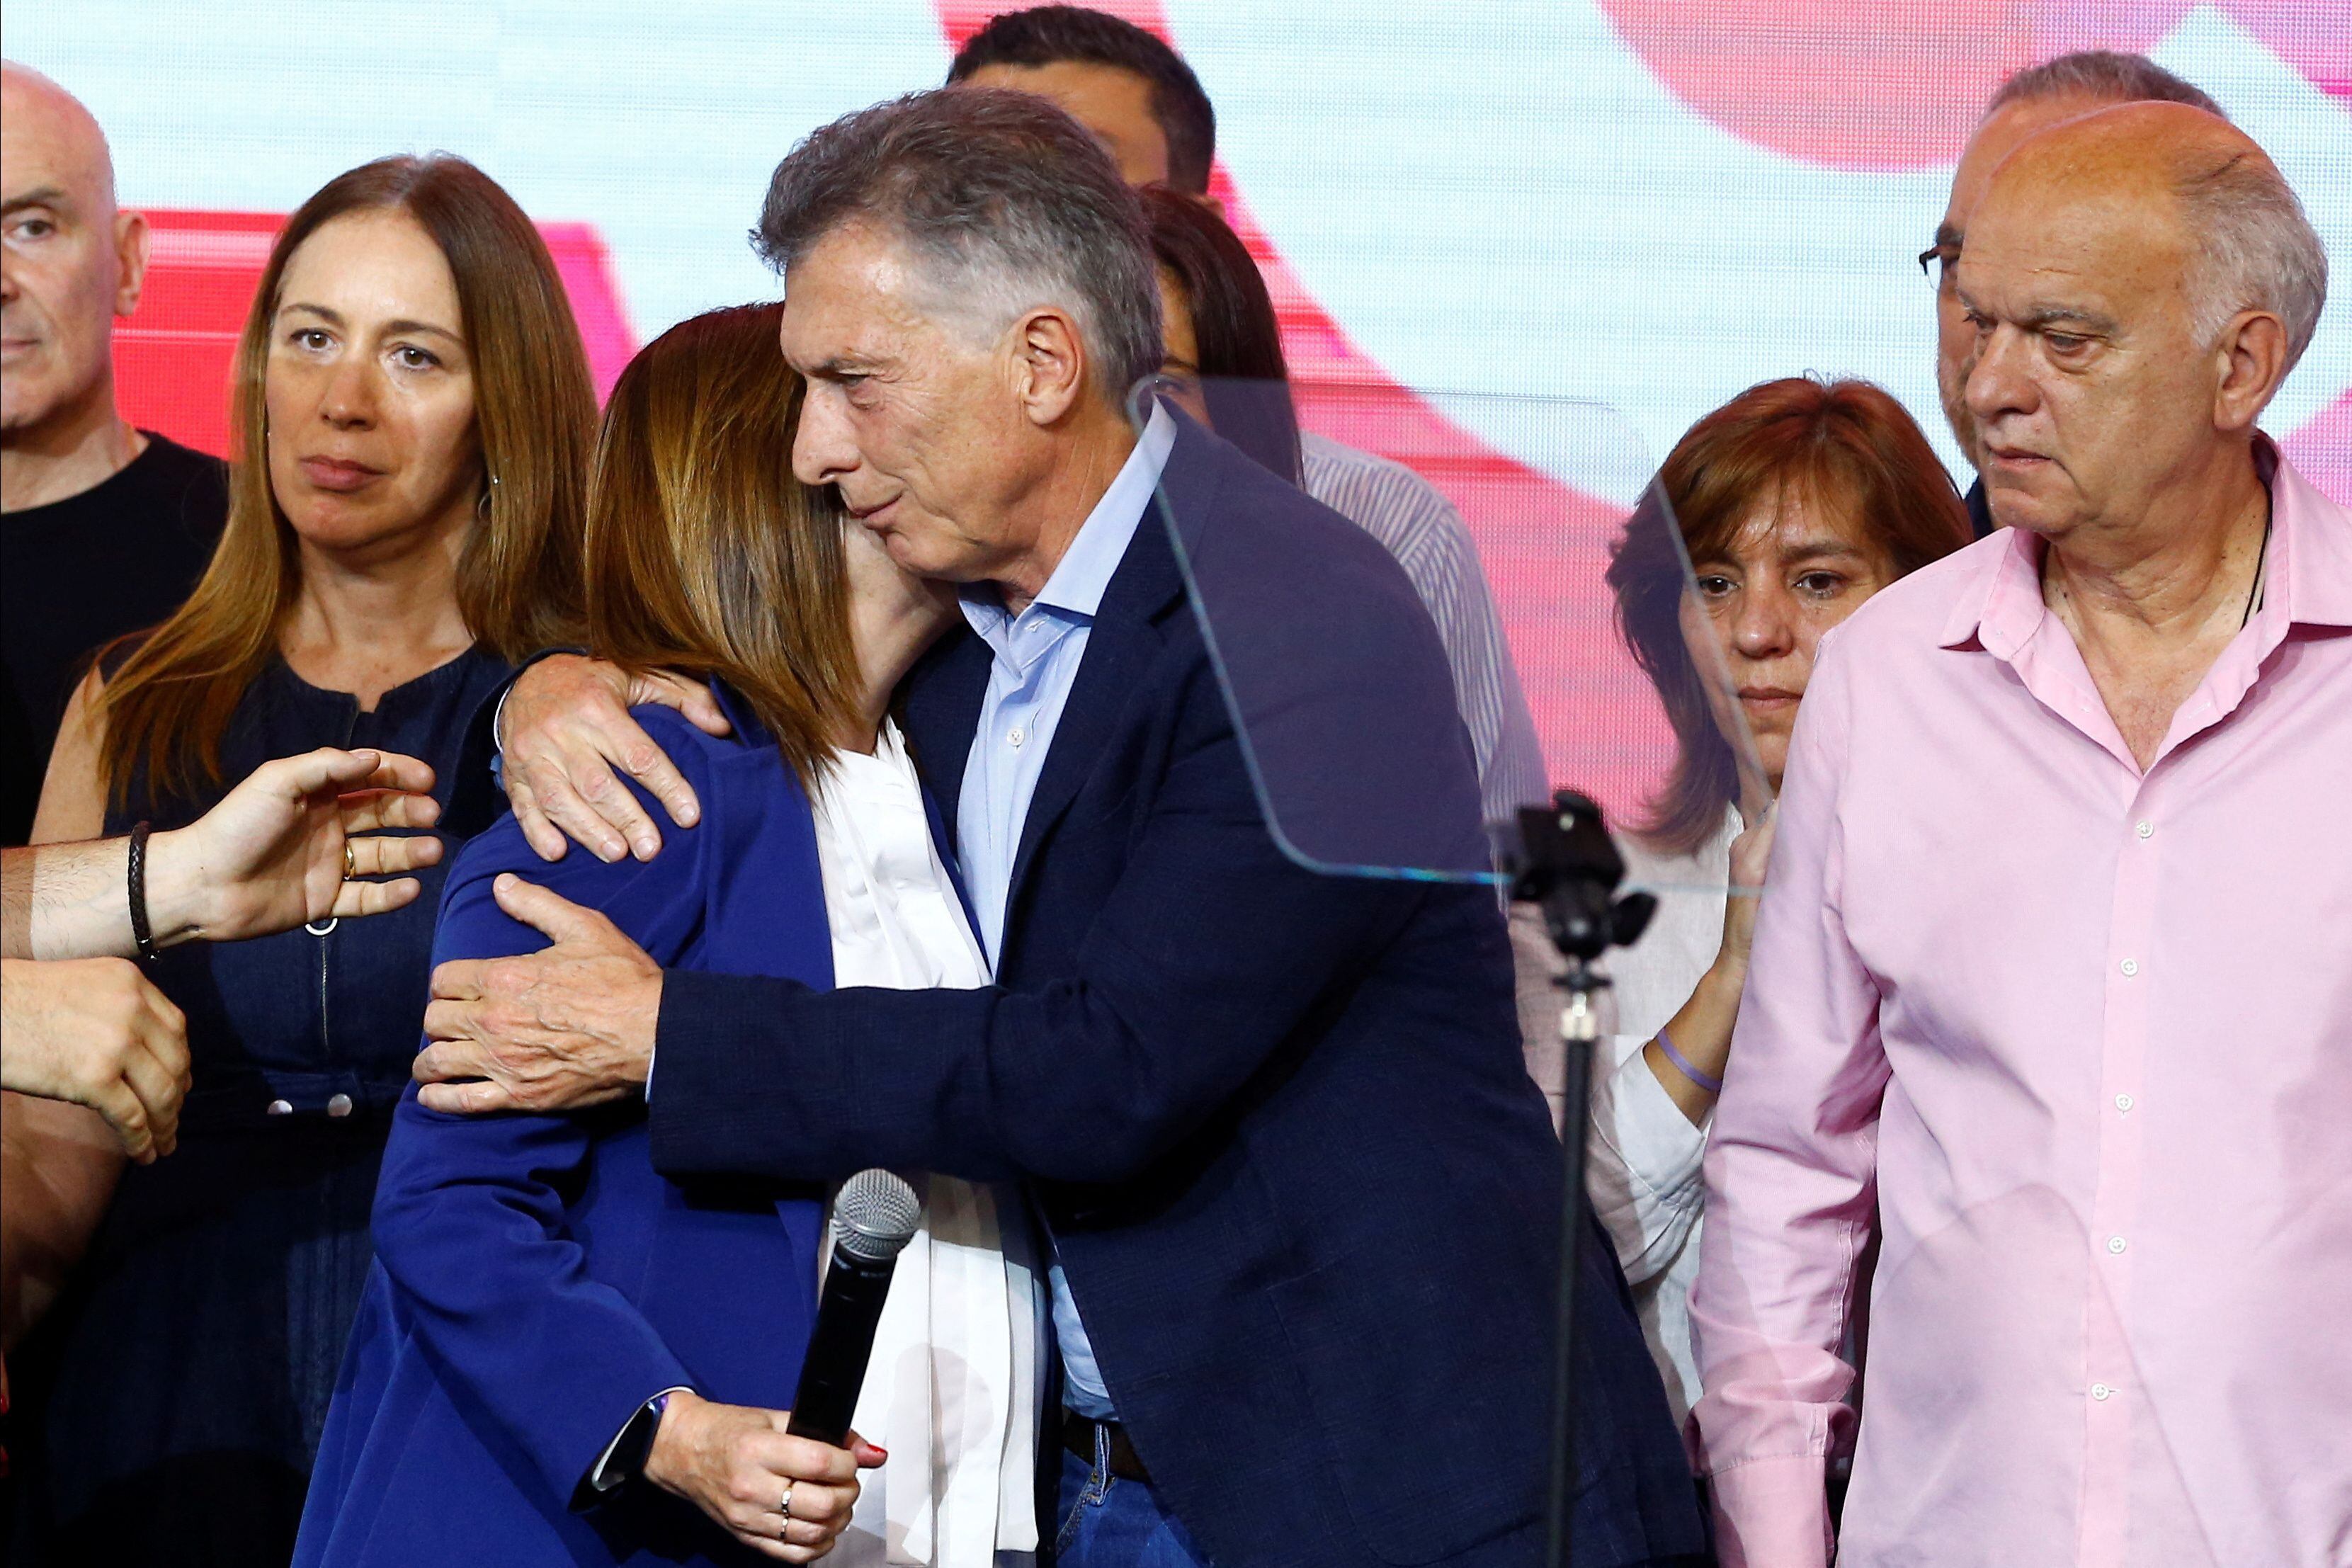 Mauricio Macri was the first to hug Patricia Bullrich after the JxC candidate's final speech (Reuters Photo)